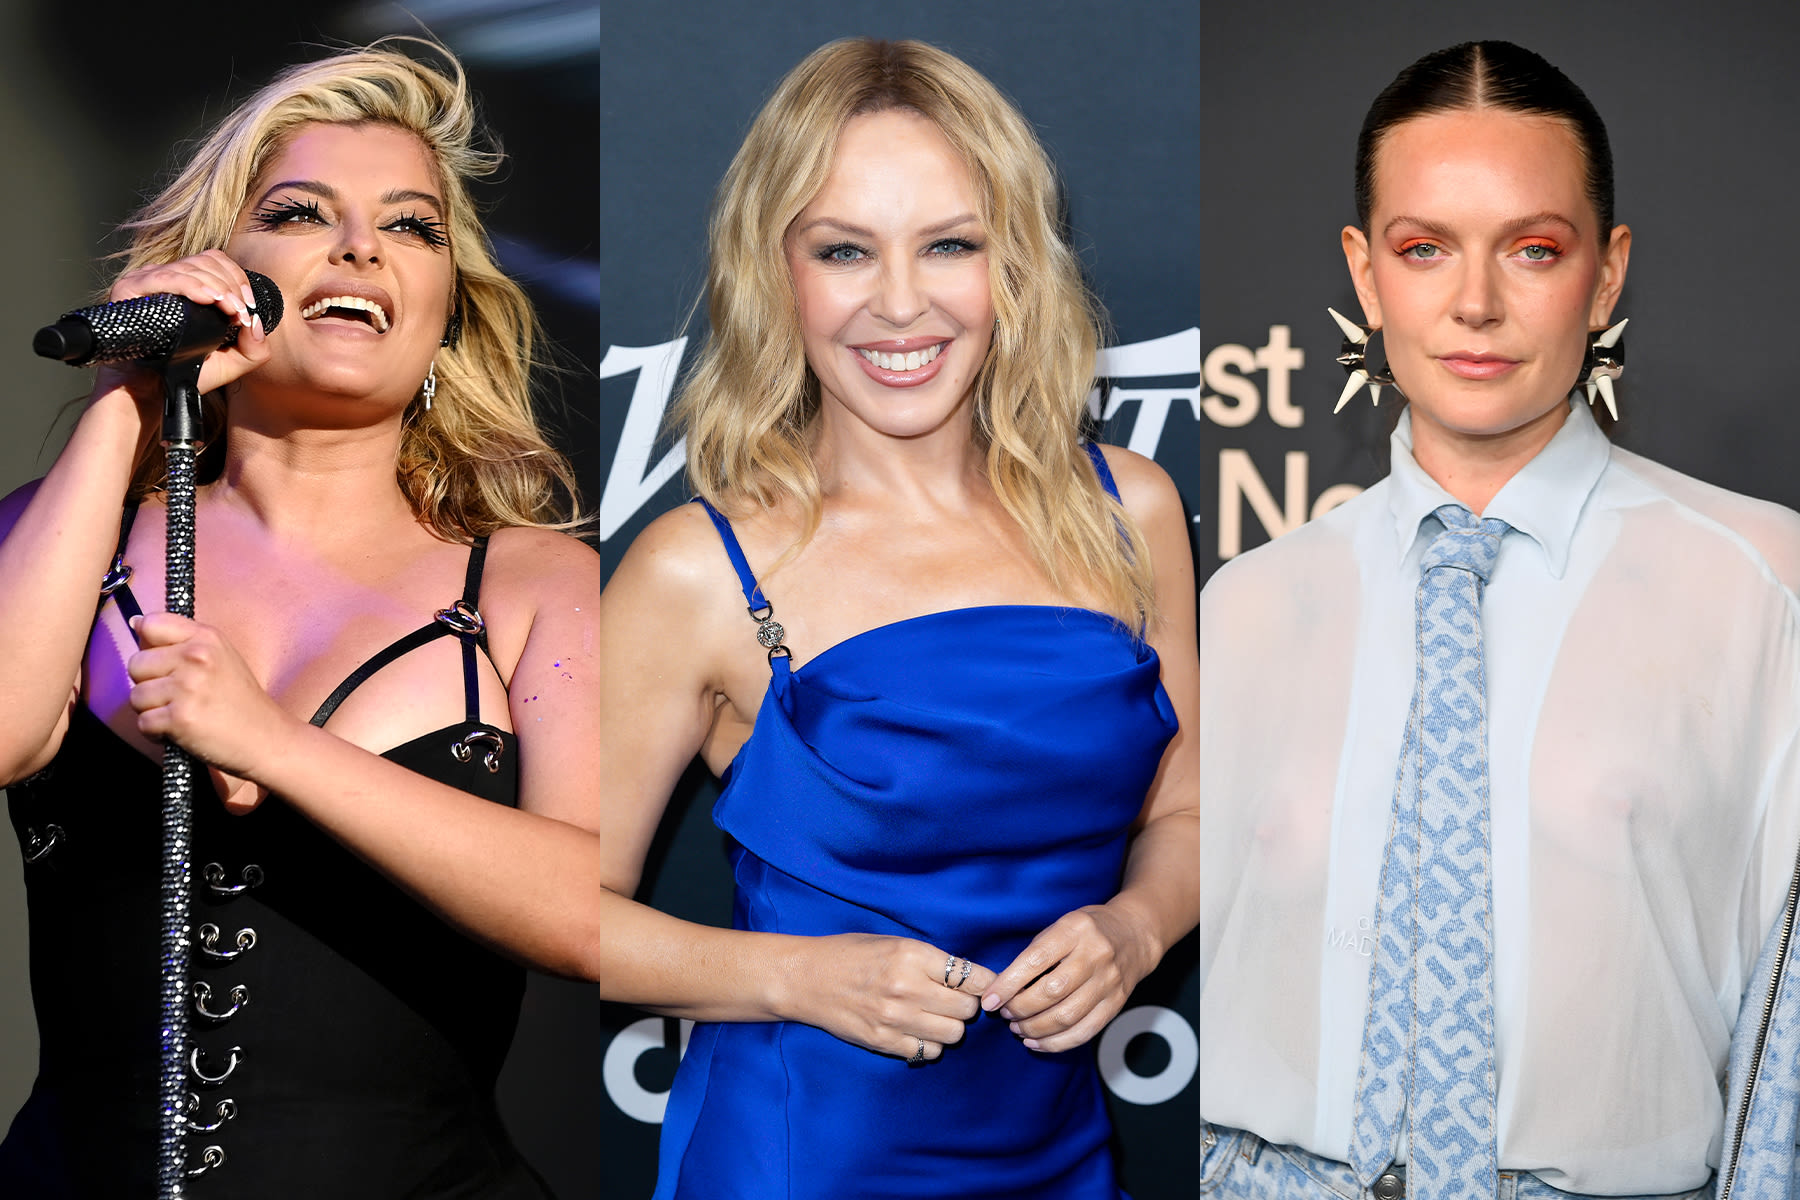 Are Bebe Rexha, Kylie Minogue, and Tove Lo About to Become Dance Pop’s ‘Charlie’s Angels’?